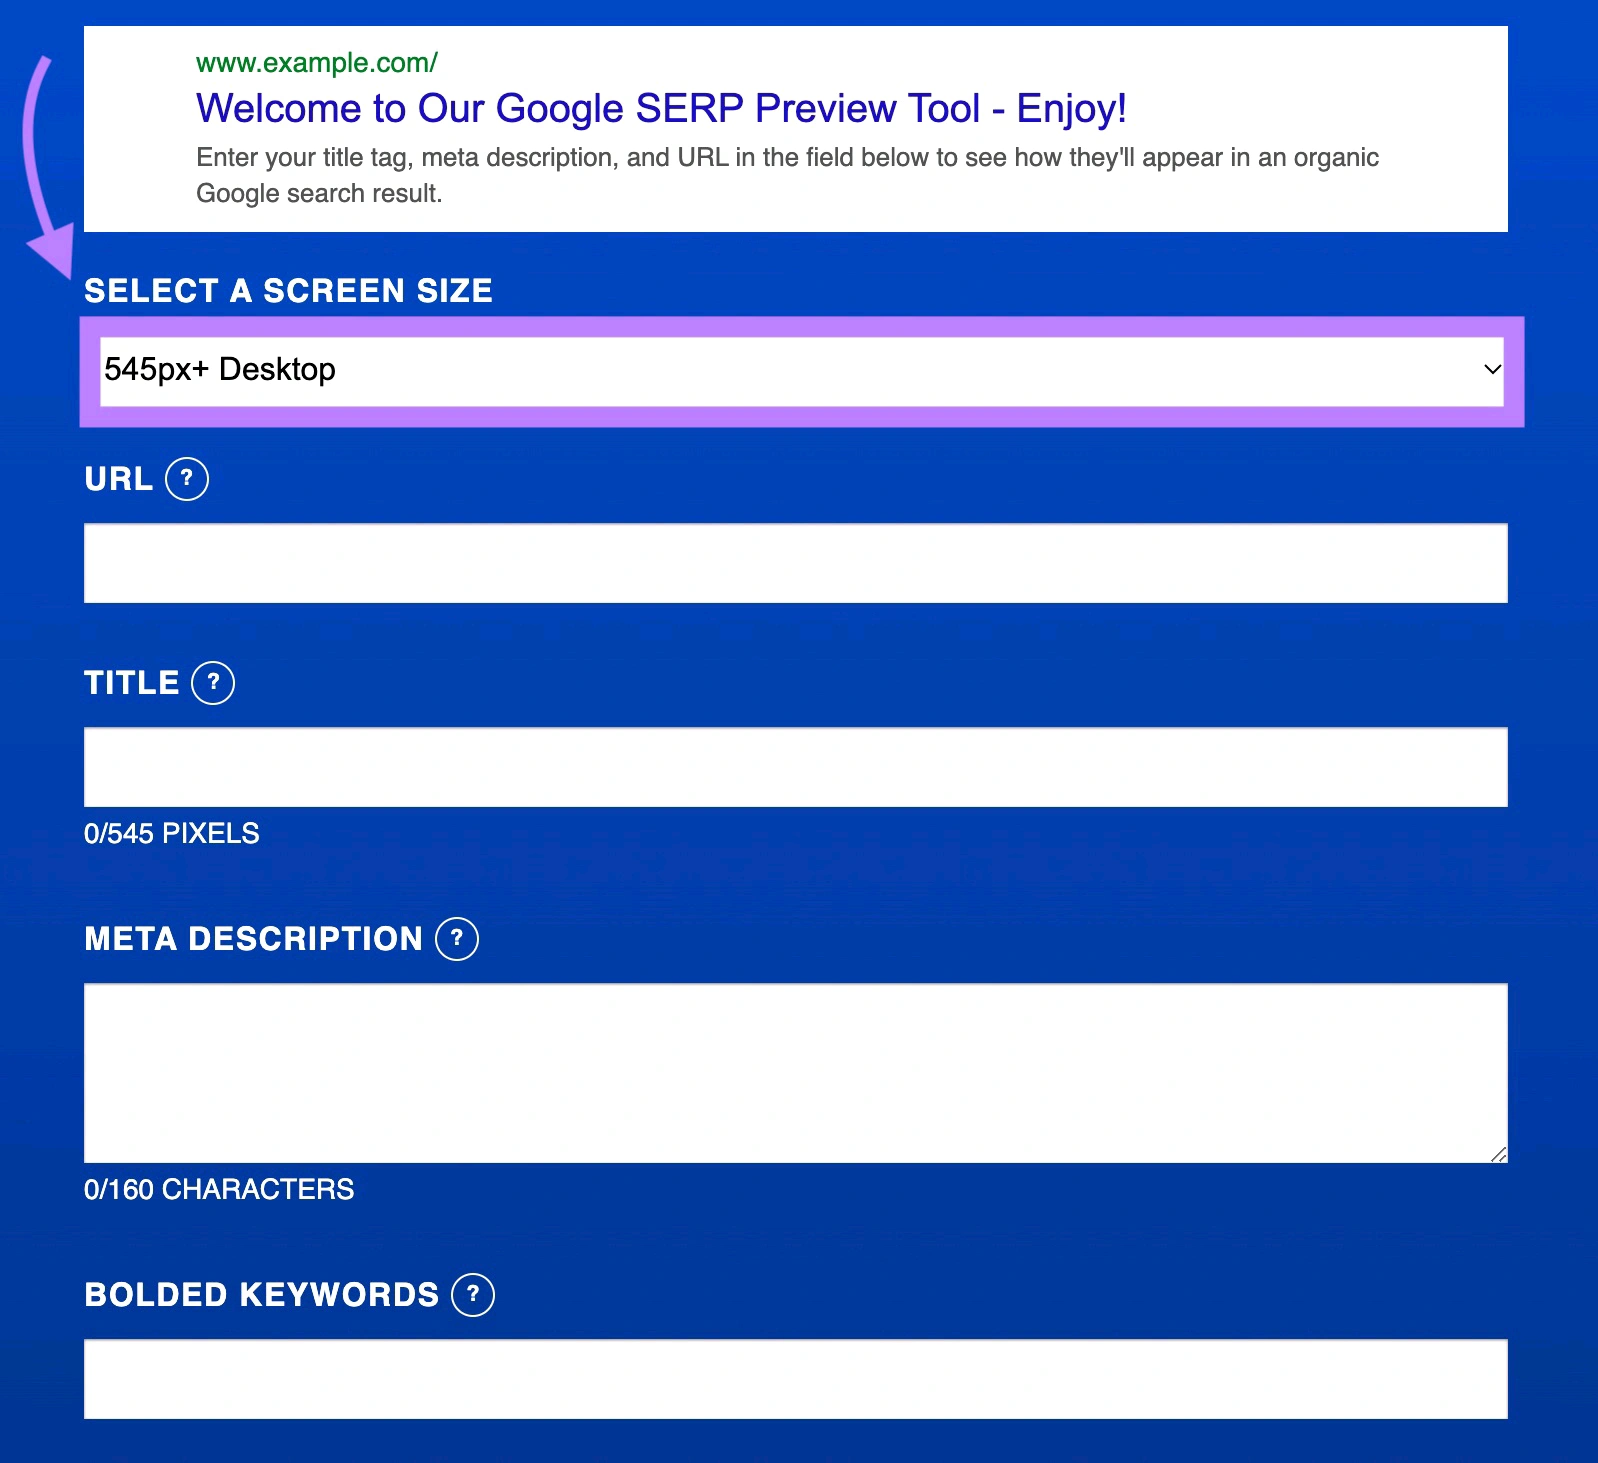 SERP Preview Tool Portent